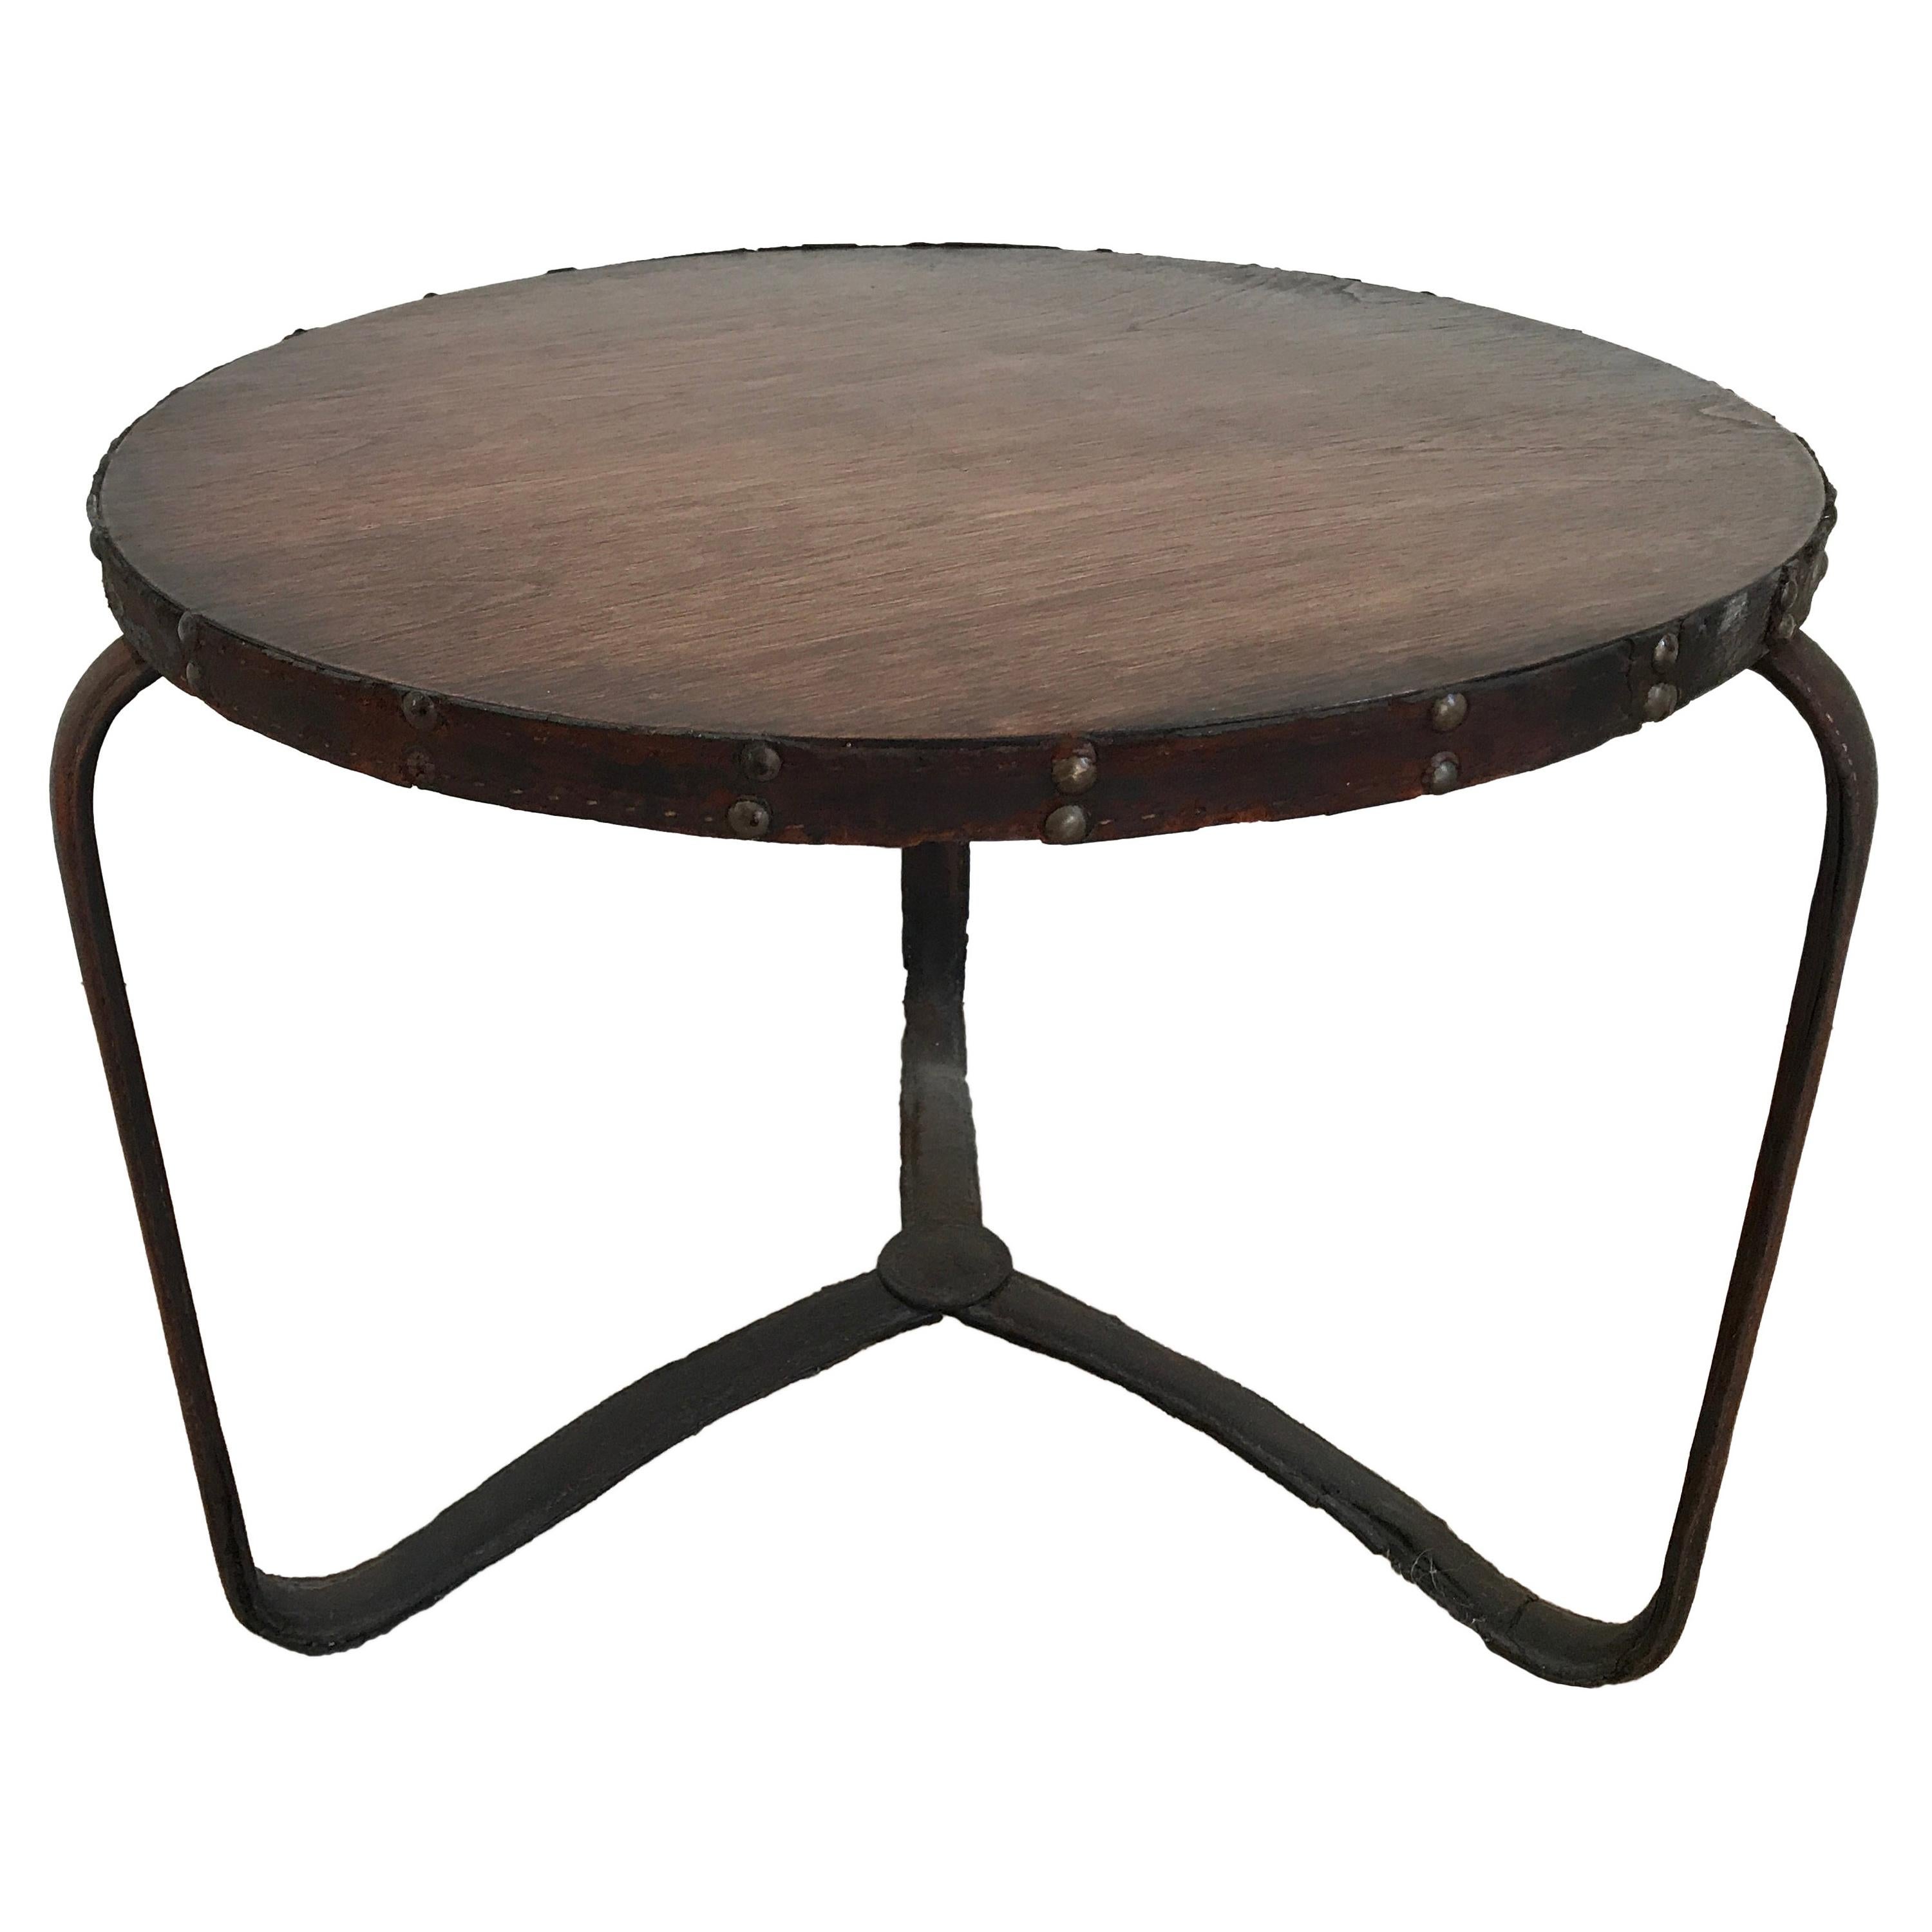 Jacques Adnet Stitched Leather Table For Sale